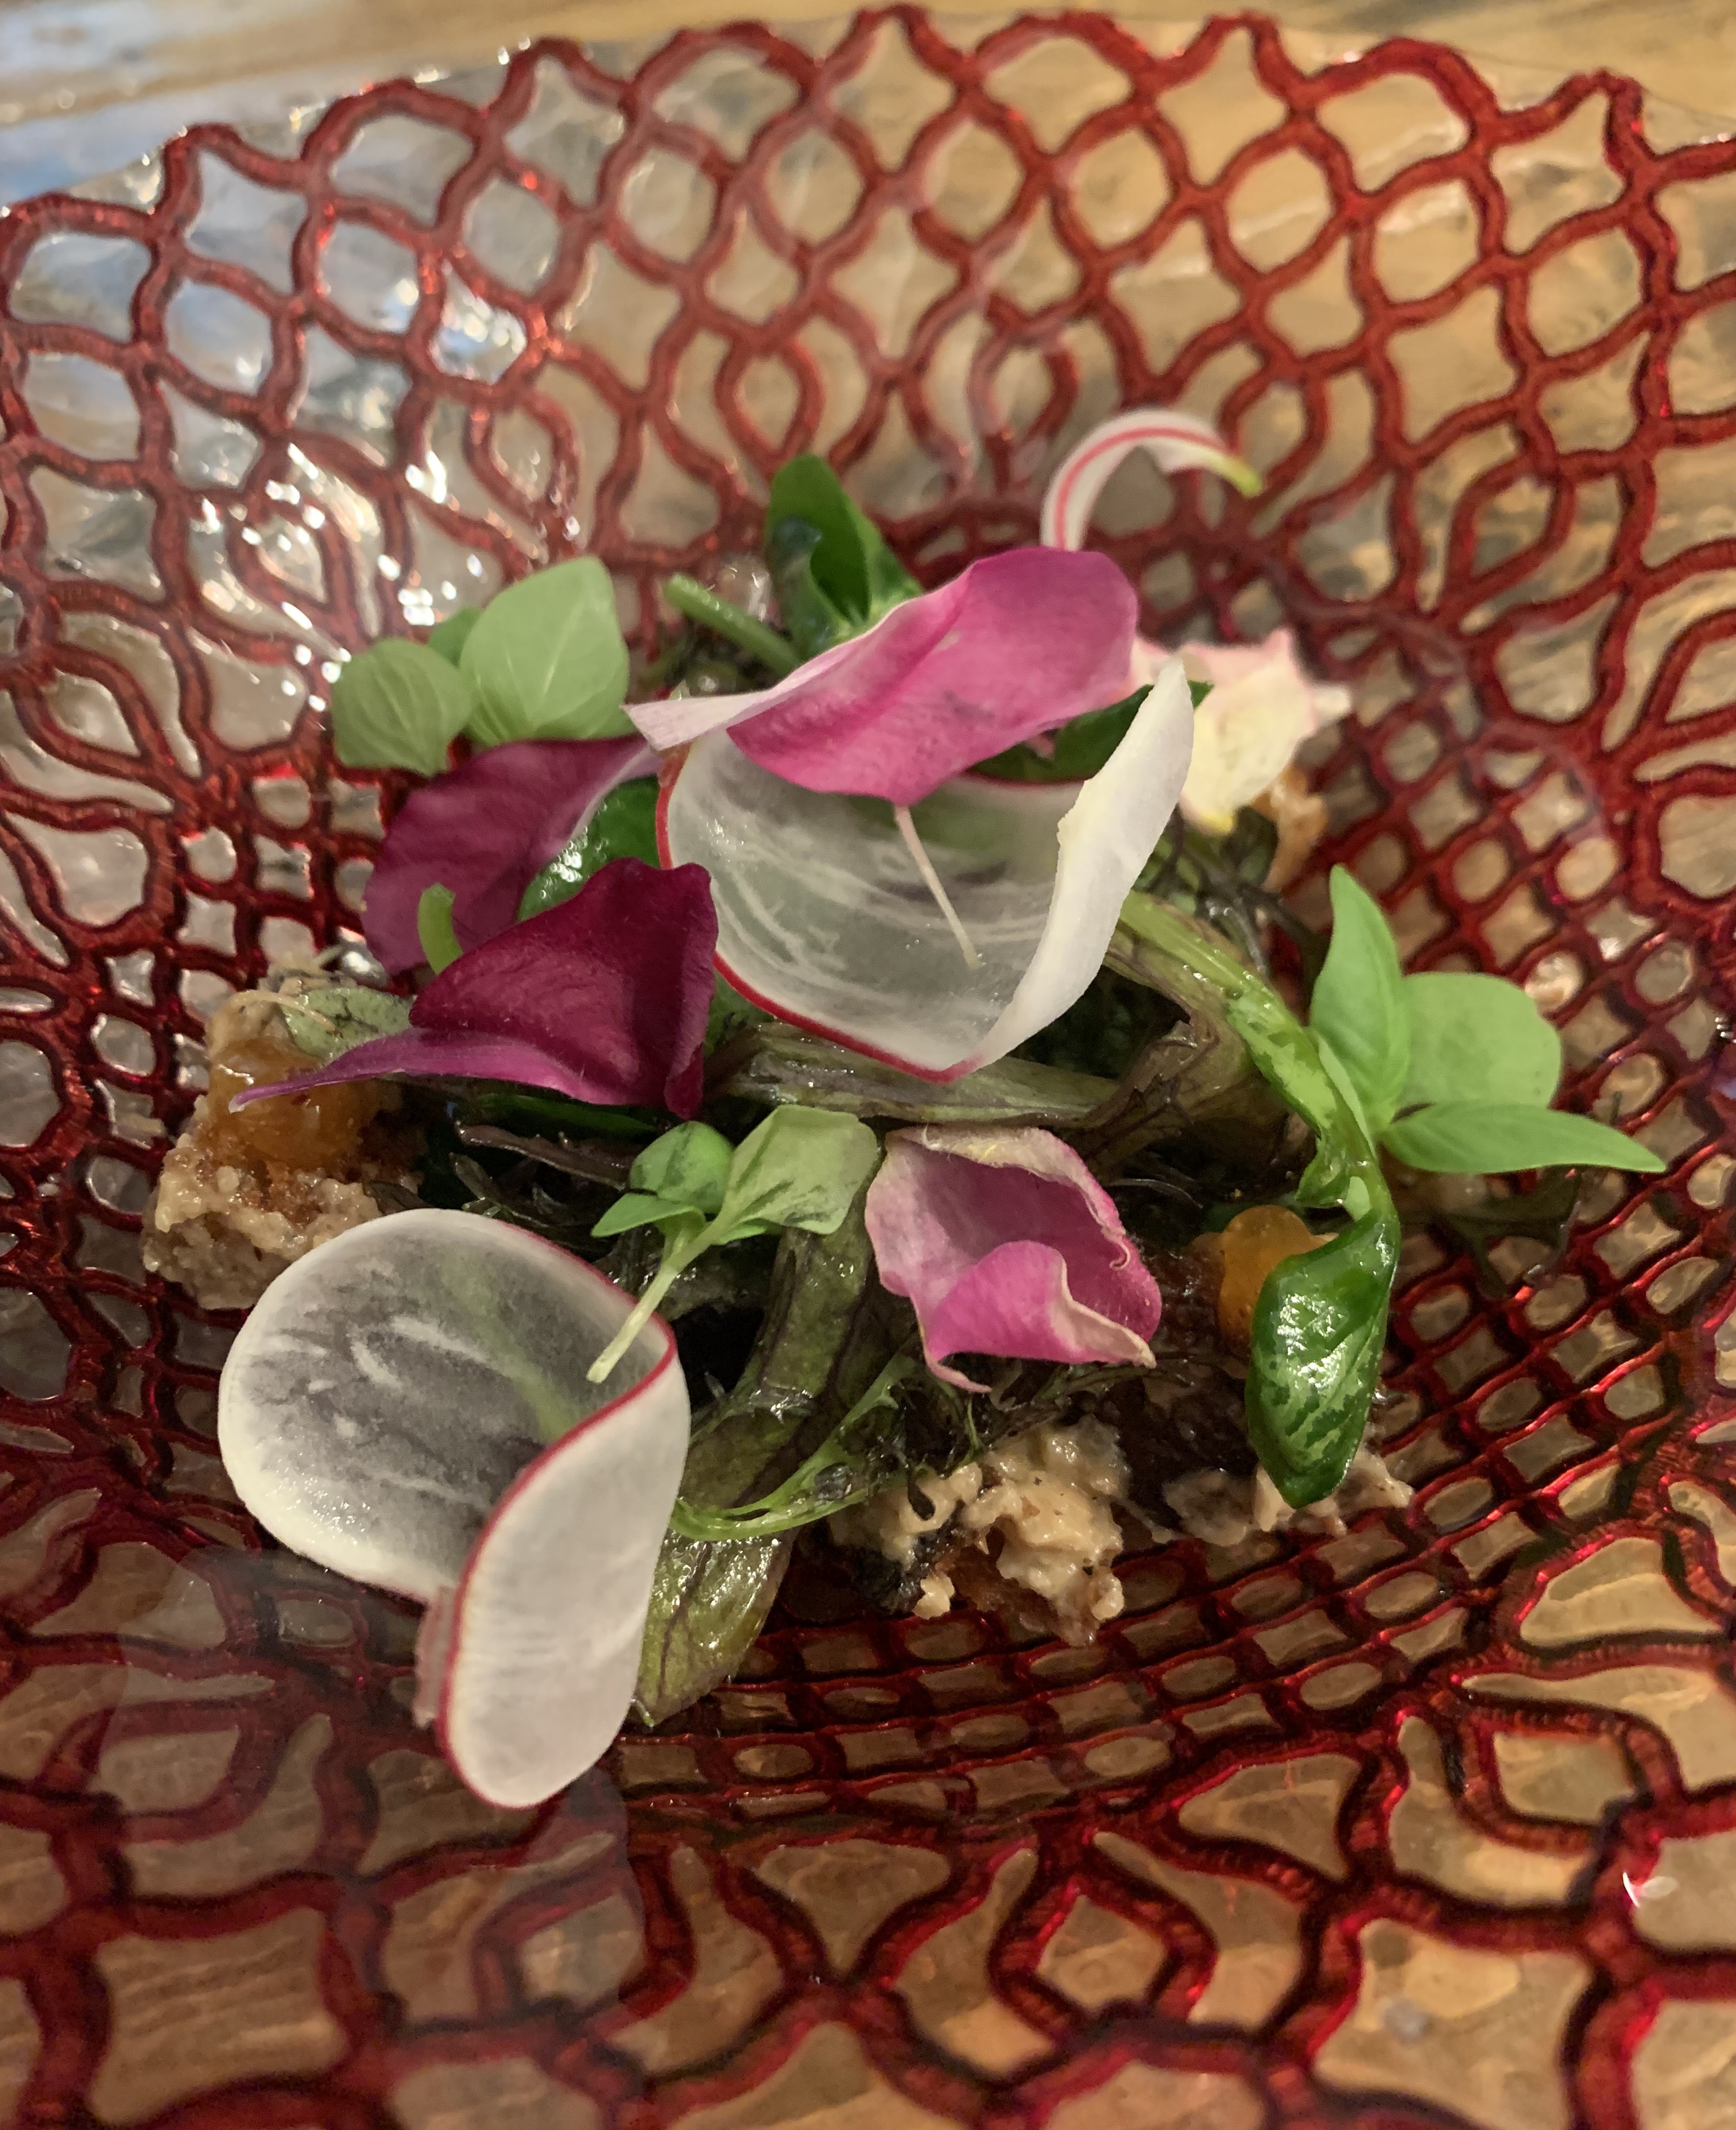 Brightly-coloured salad served in a translucent plate with red scrollwork, featuring light green leaves, pink petals, and crutons dressed in a dark brown sauce.